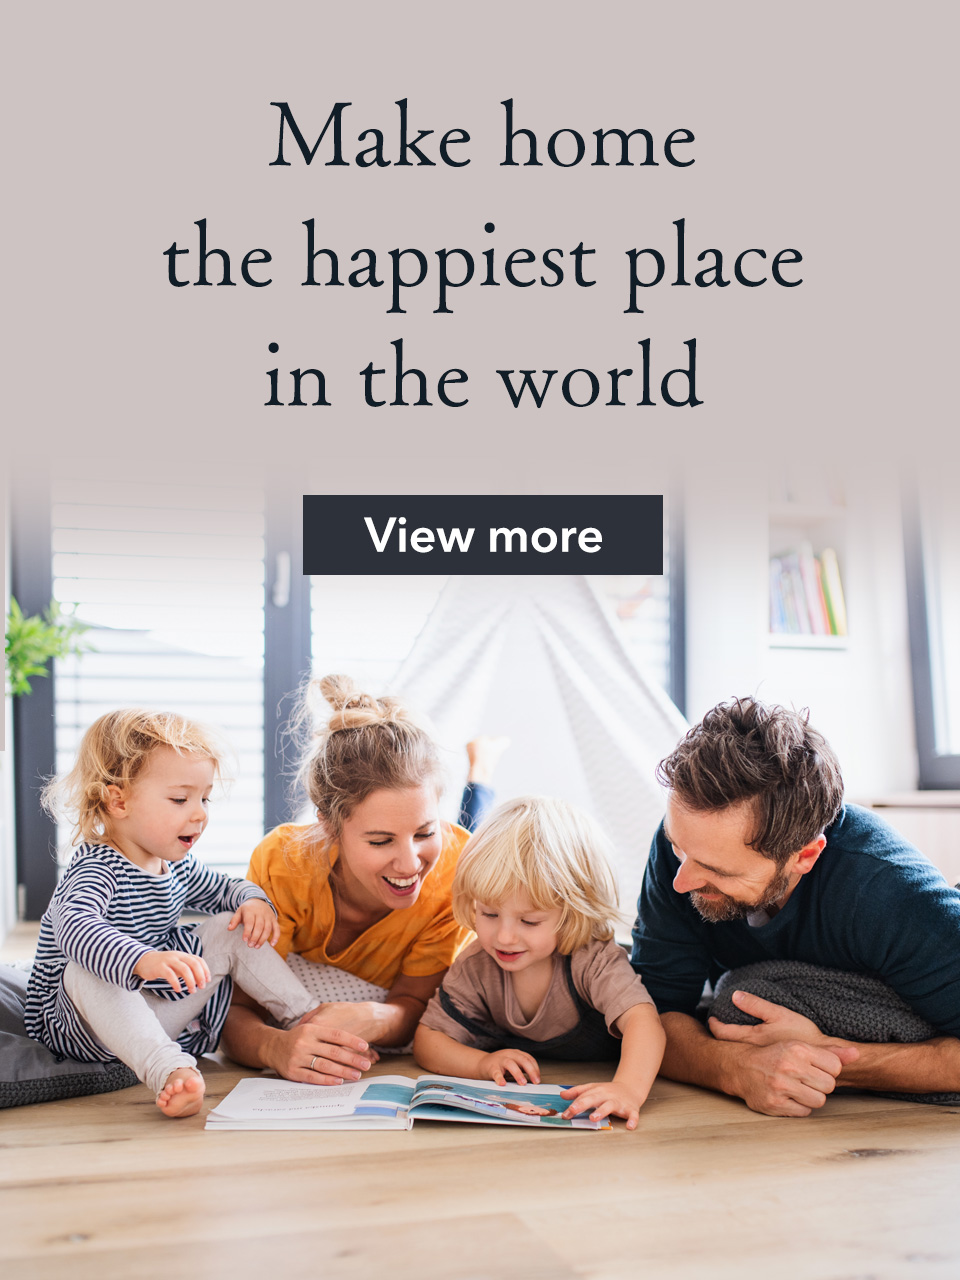 Make home the happiest place in the world